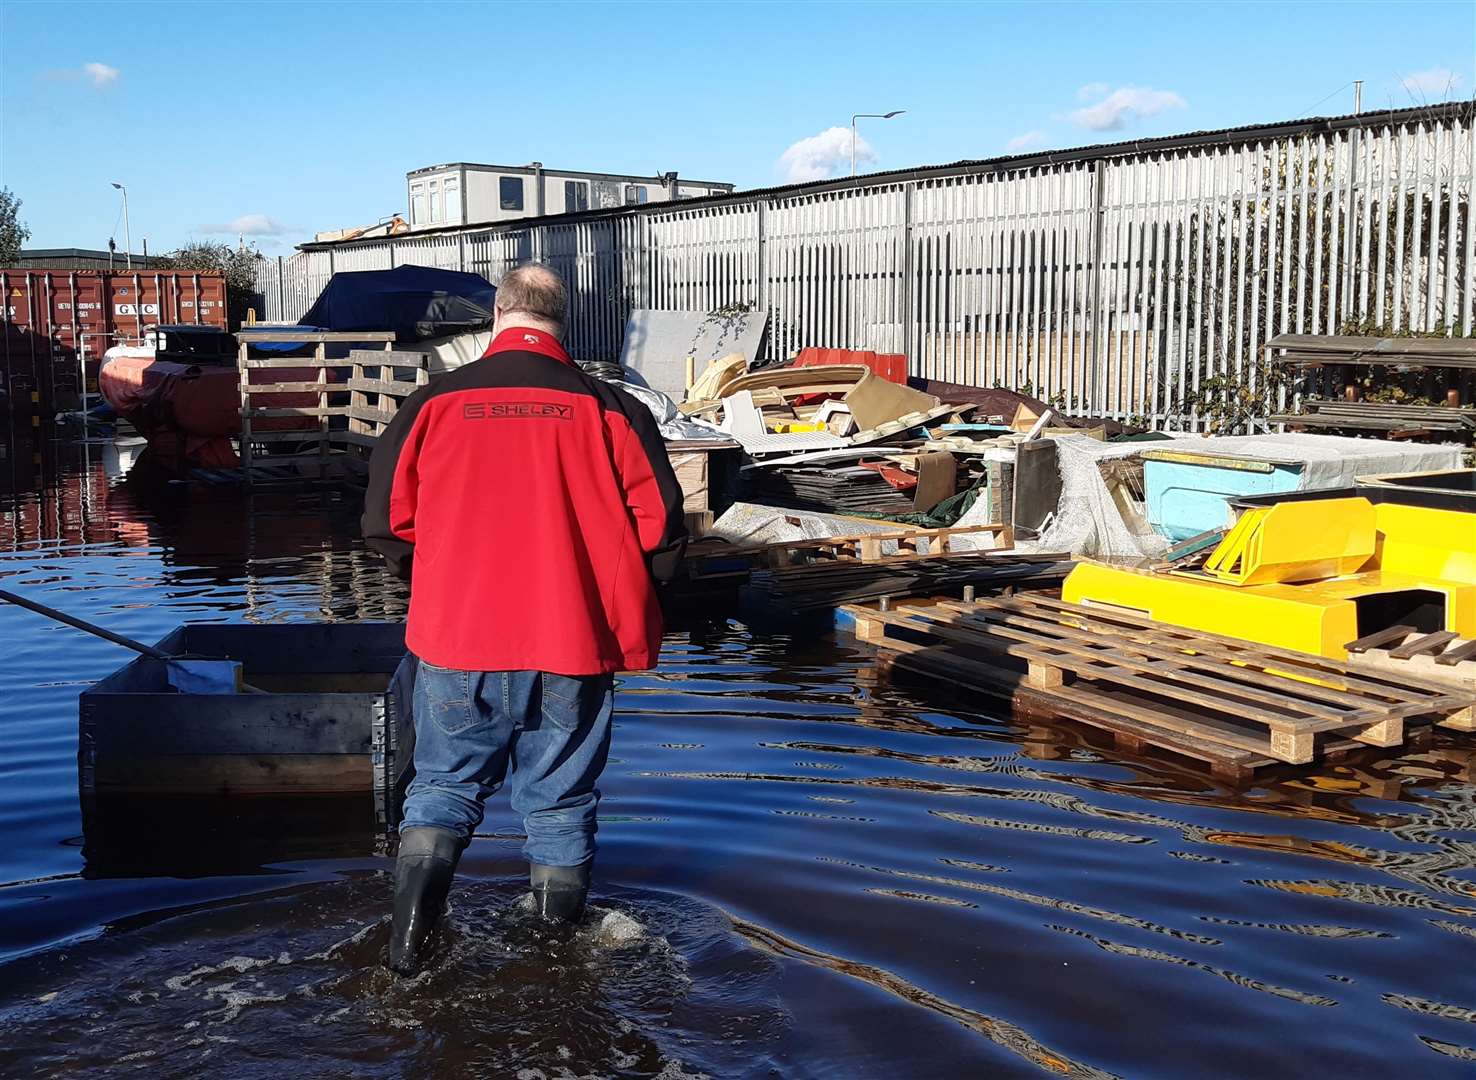 Mark Silvester says his business Dartford Composites is regularly impacted by bad flooding